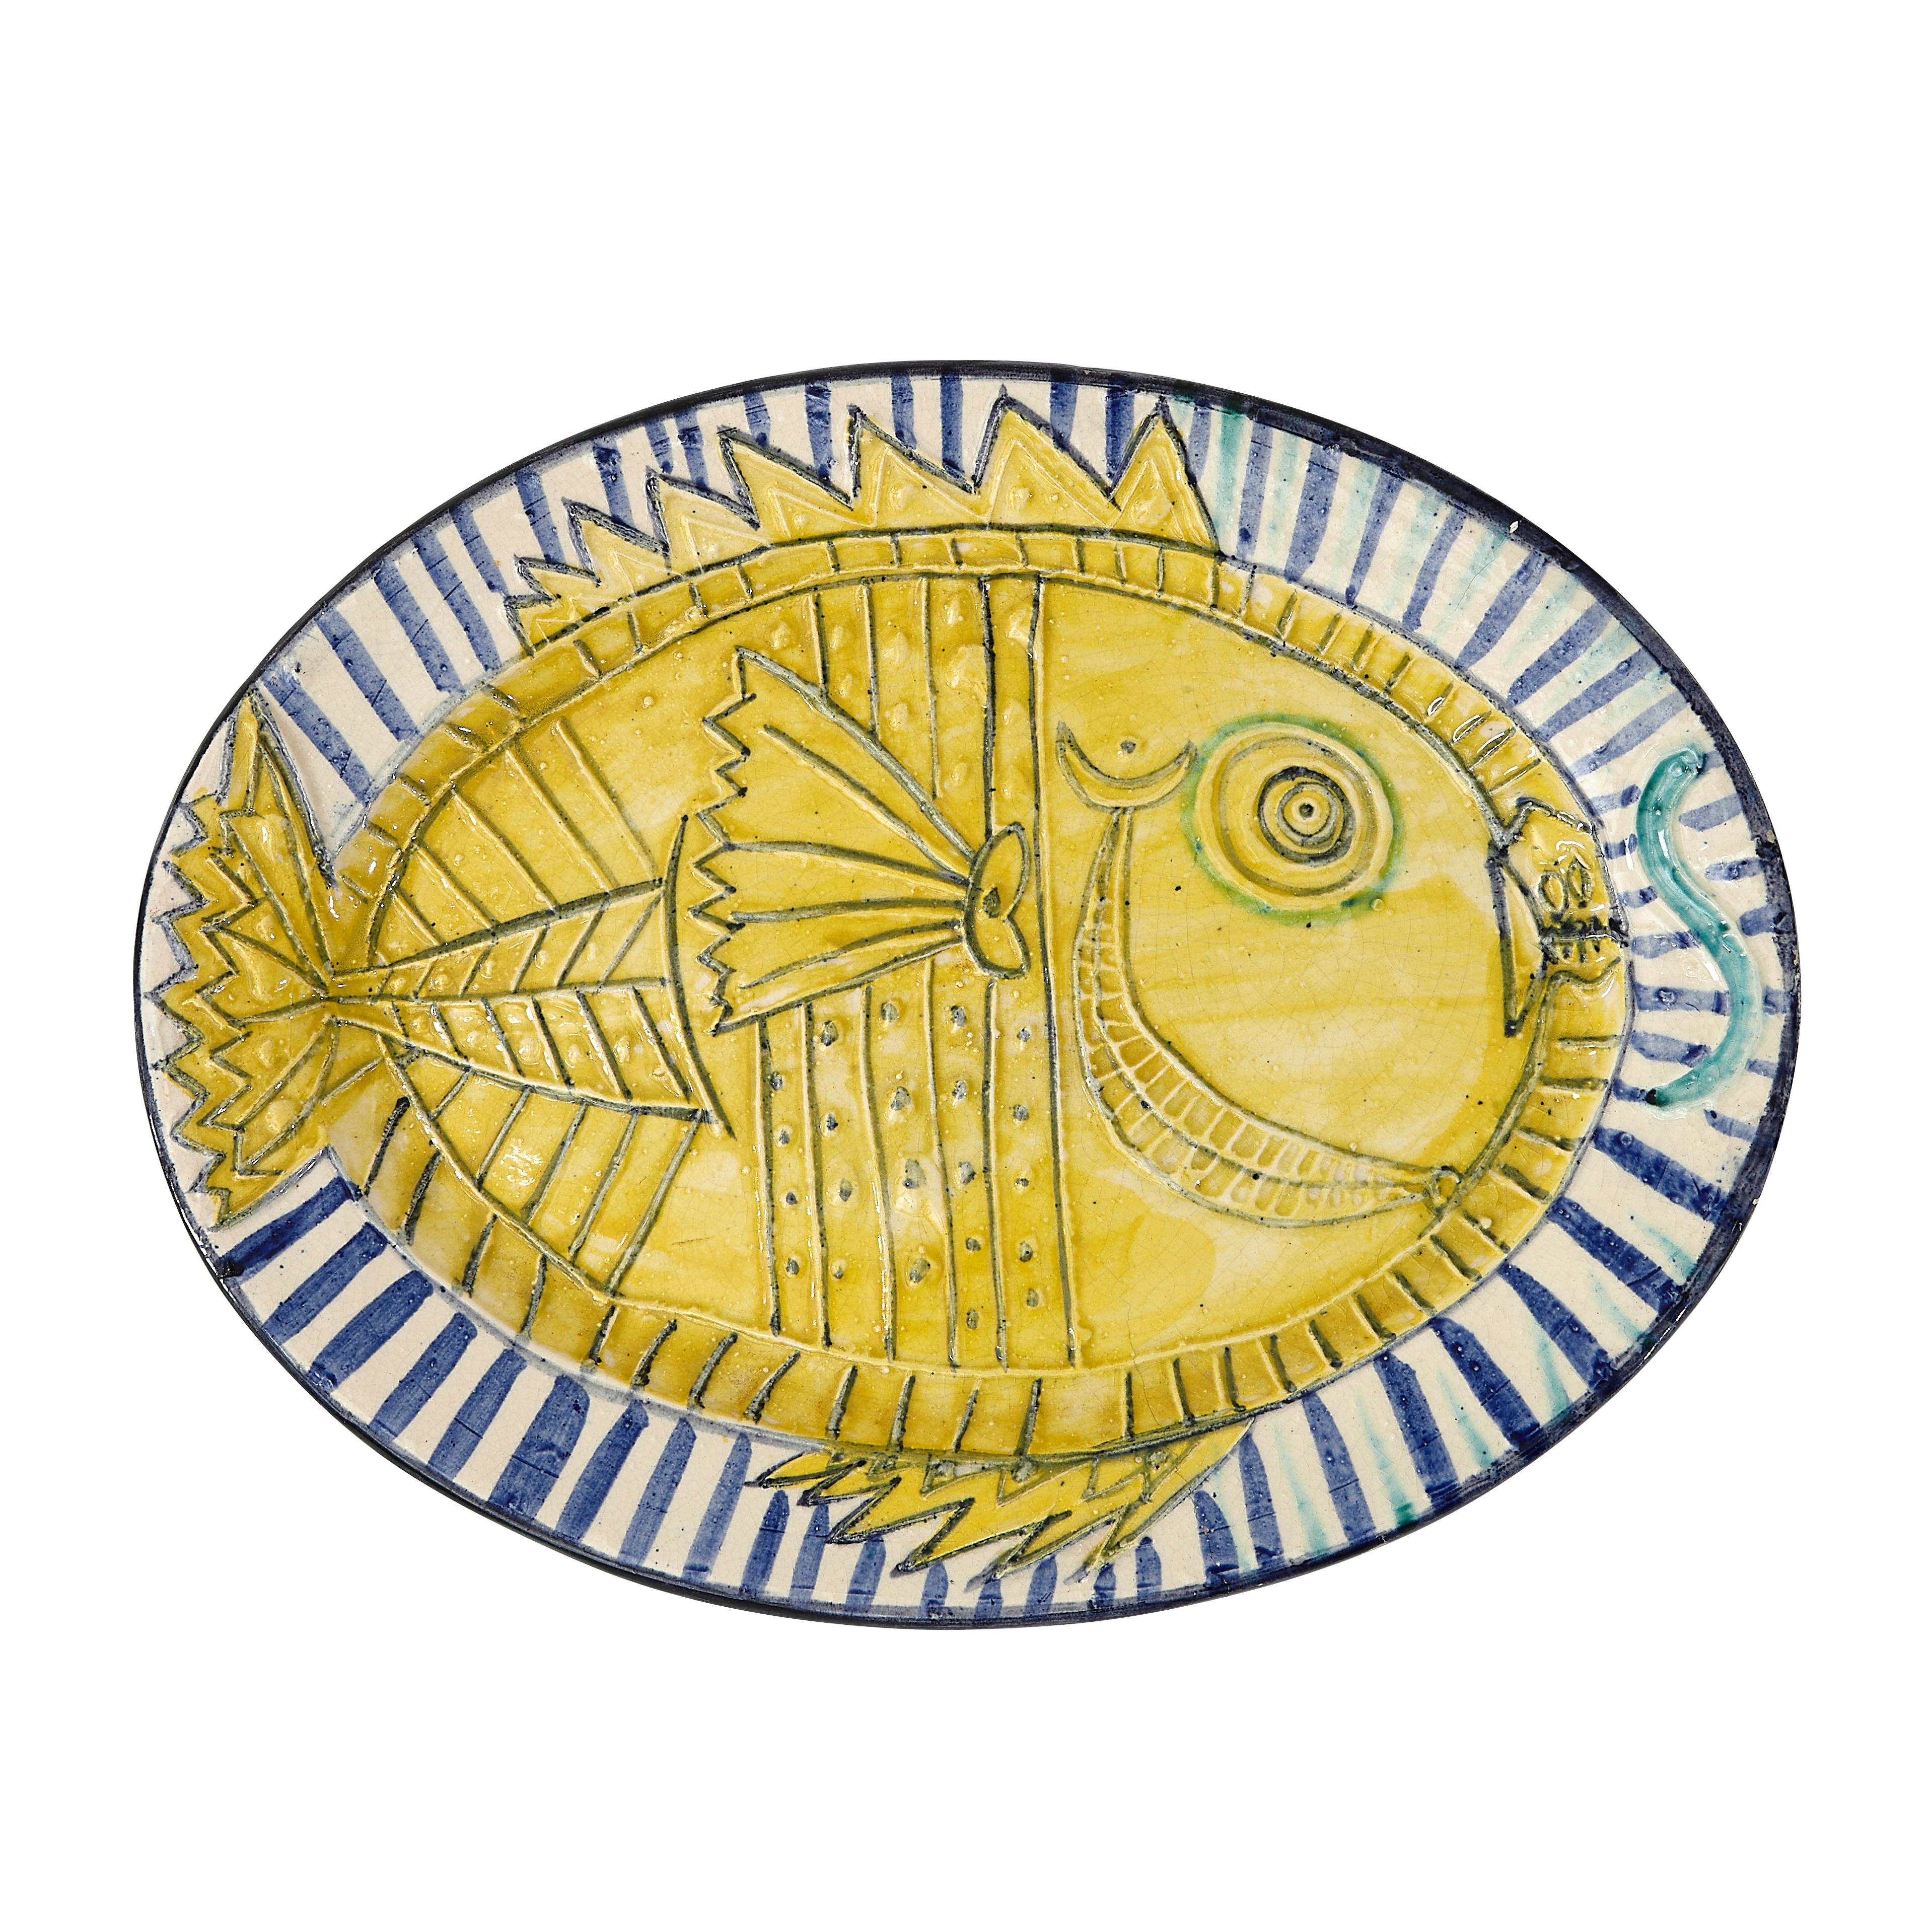 possibly real copy of 'poisson' by pablo picasso